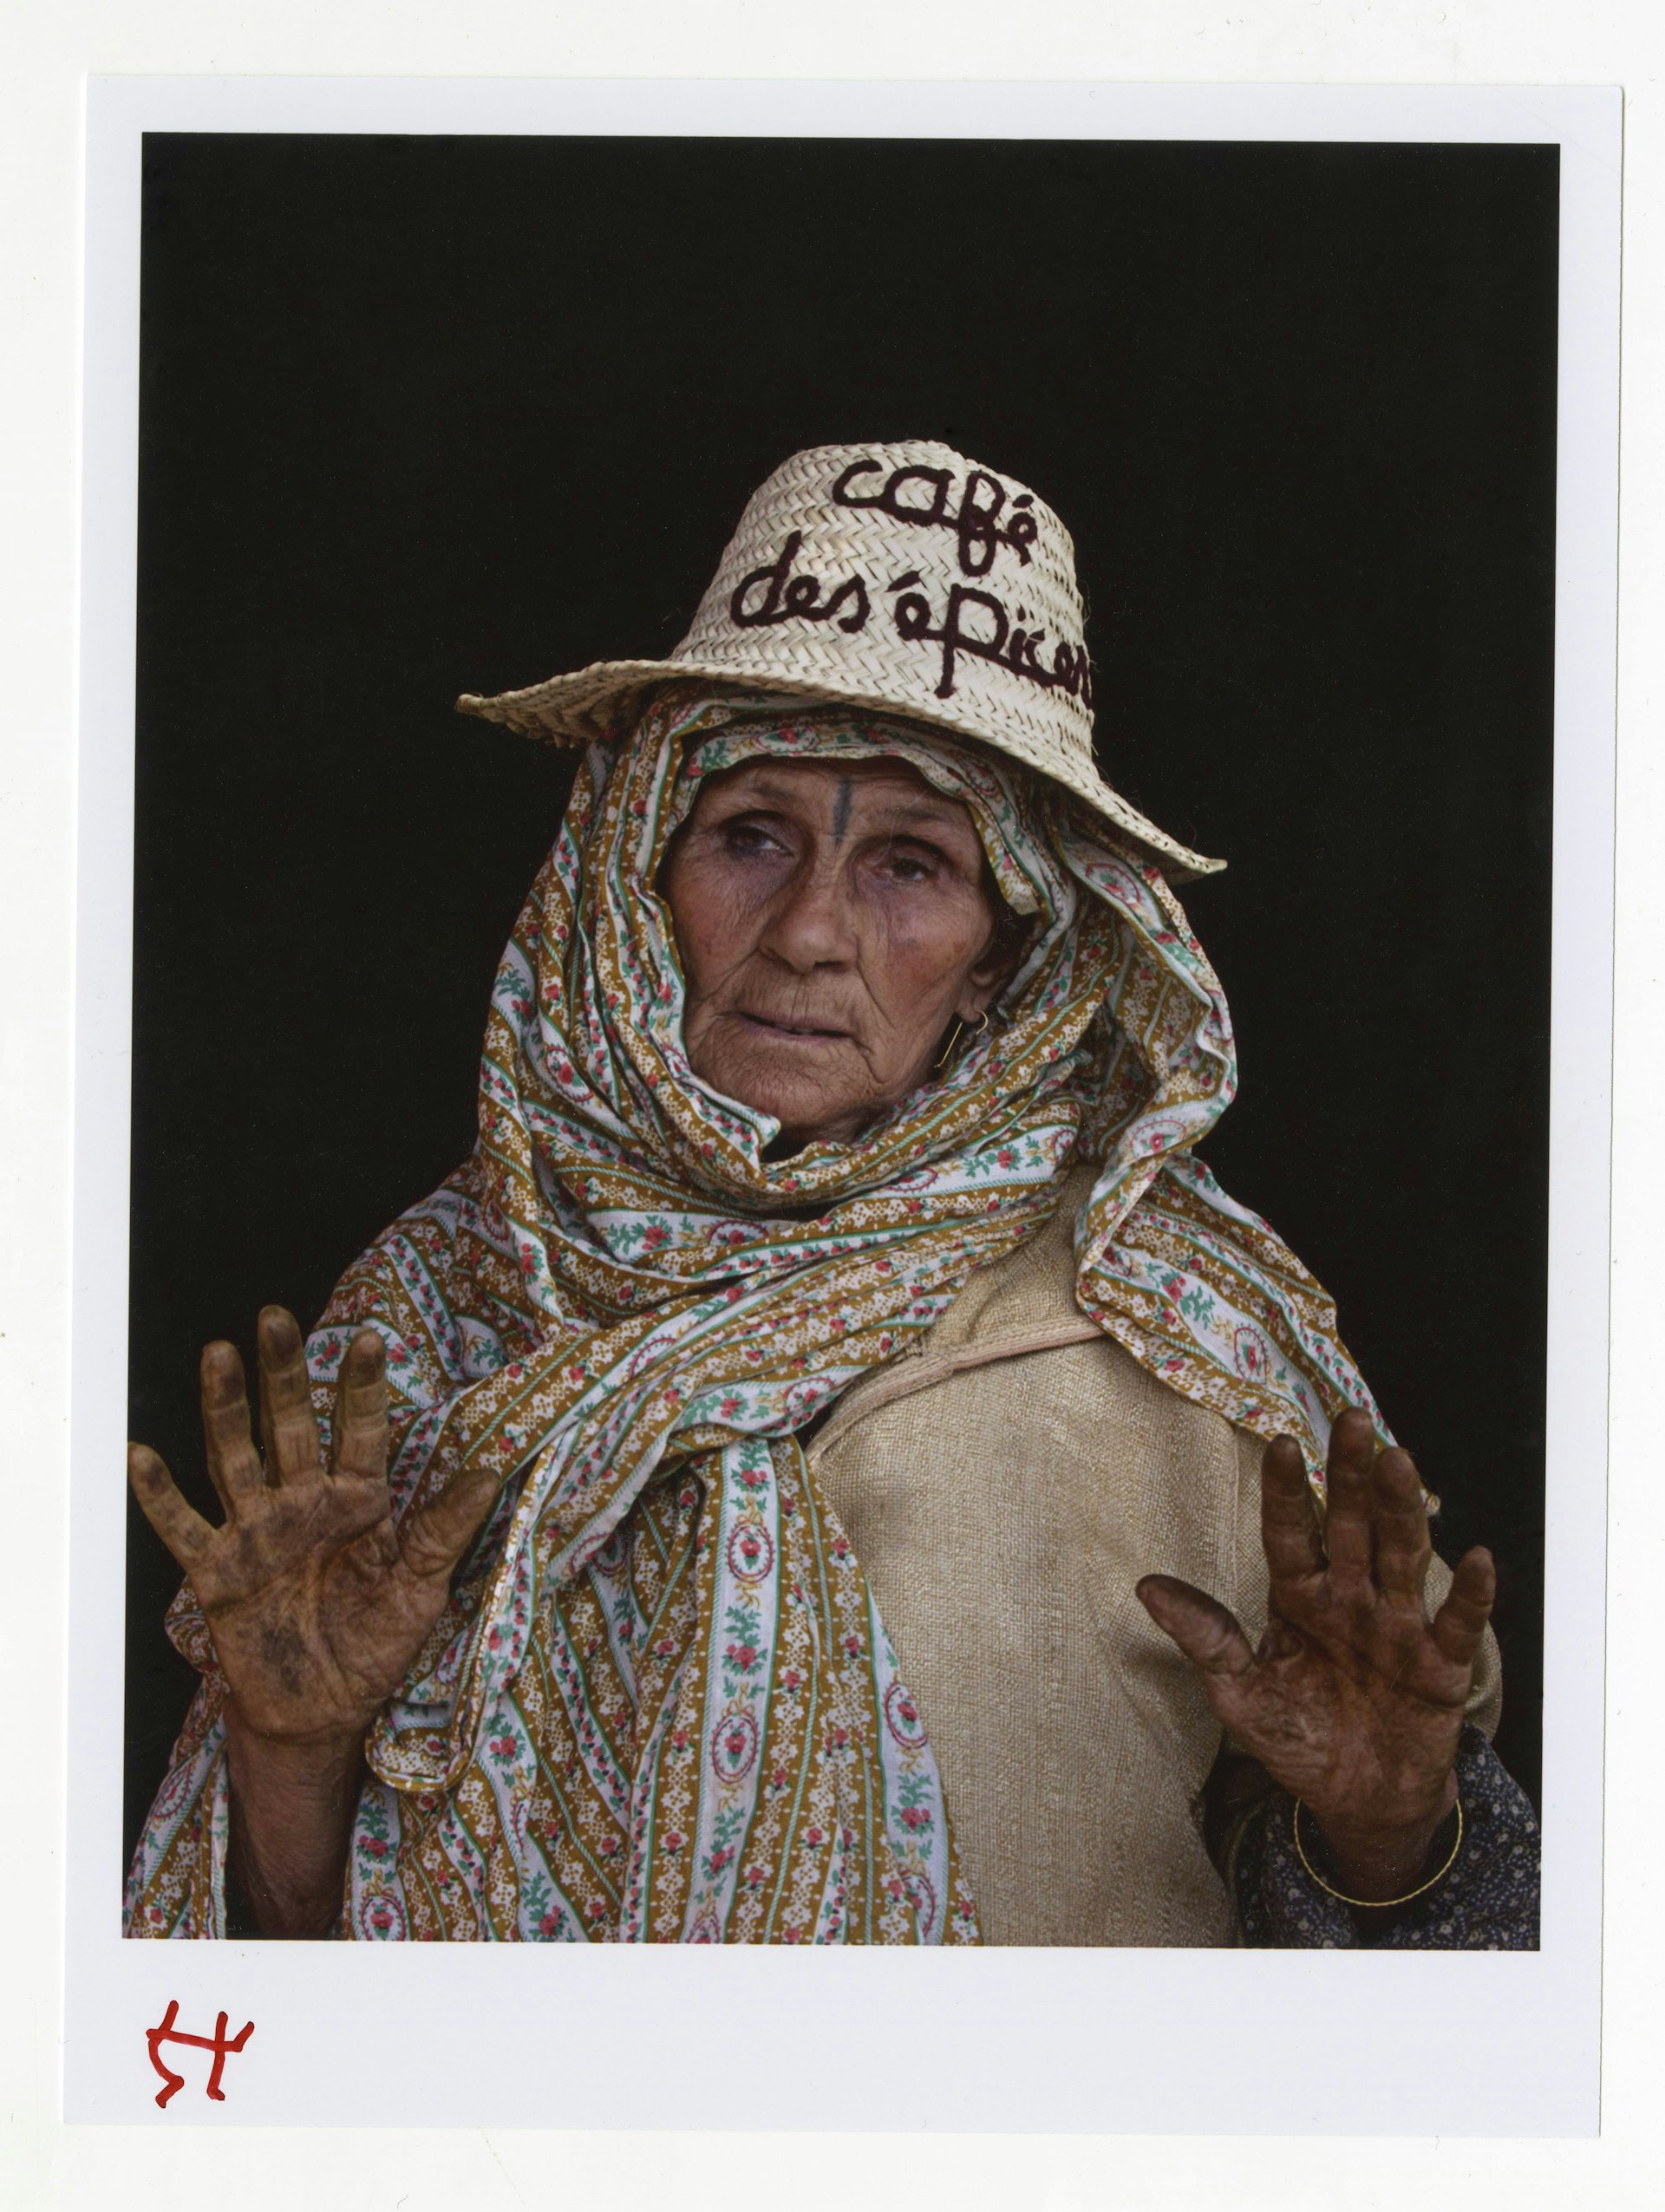 Signed portrait, Marrakech, Morocco, from the project 20 dirhams or 1 photo?, 2013